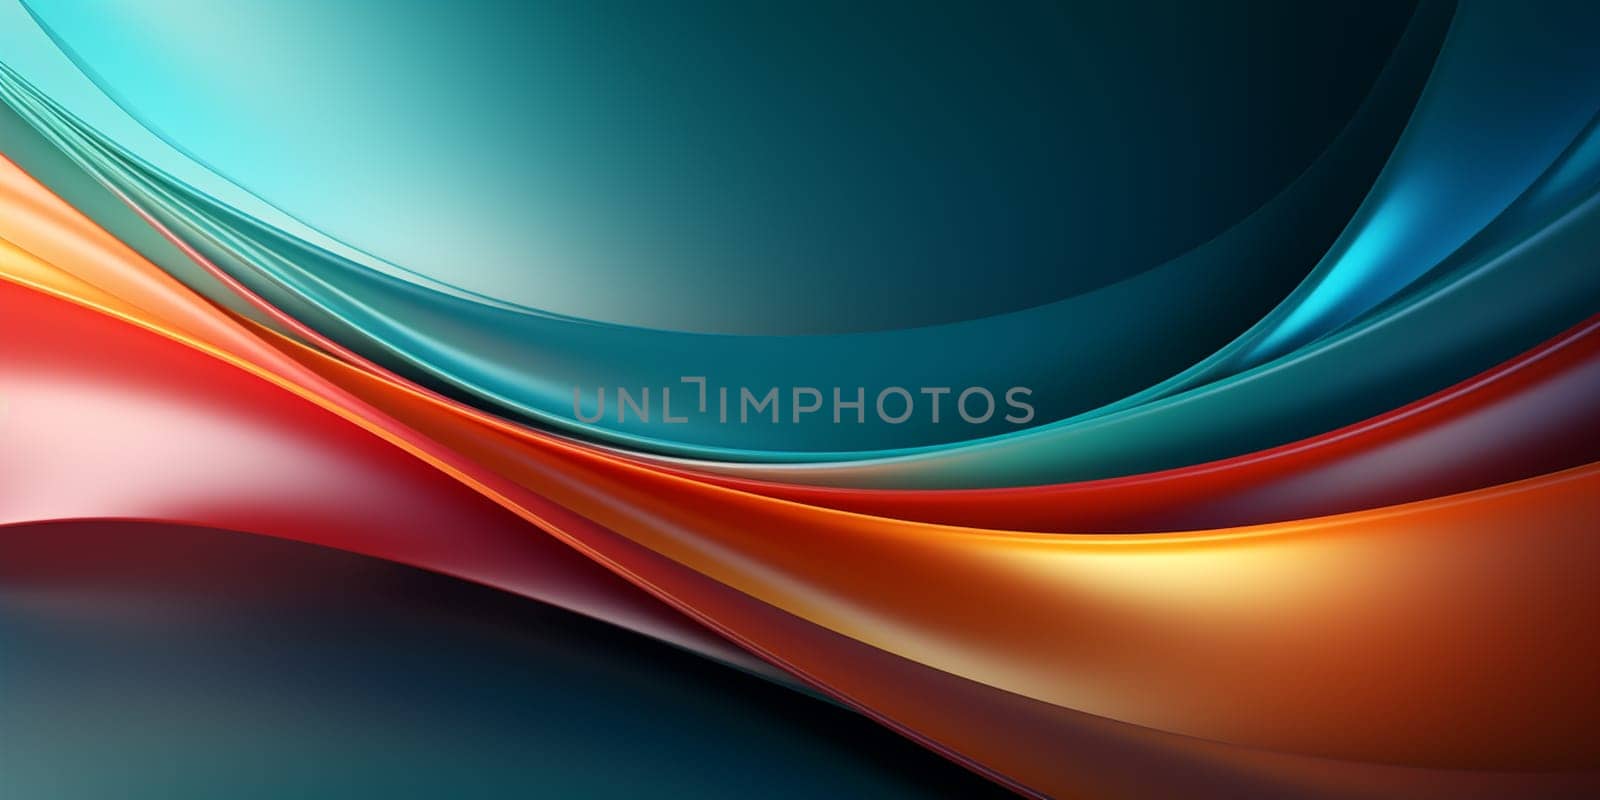 blue and orange abstract background. High quality photo